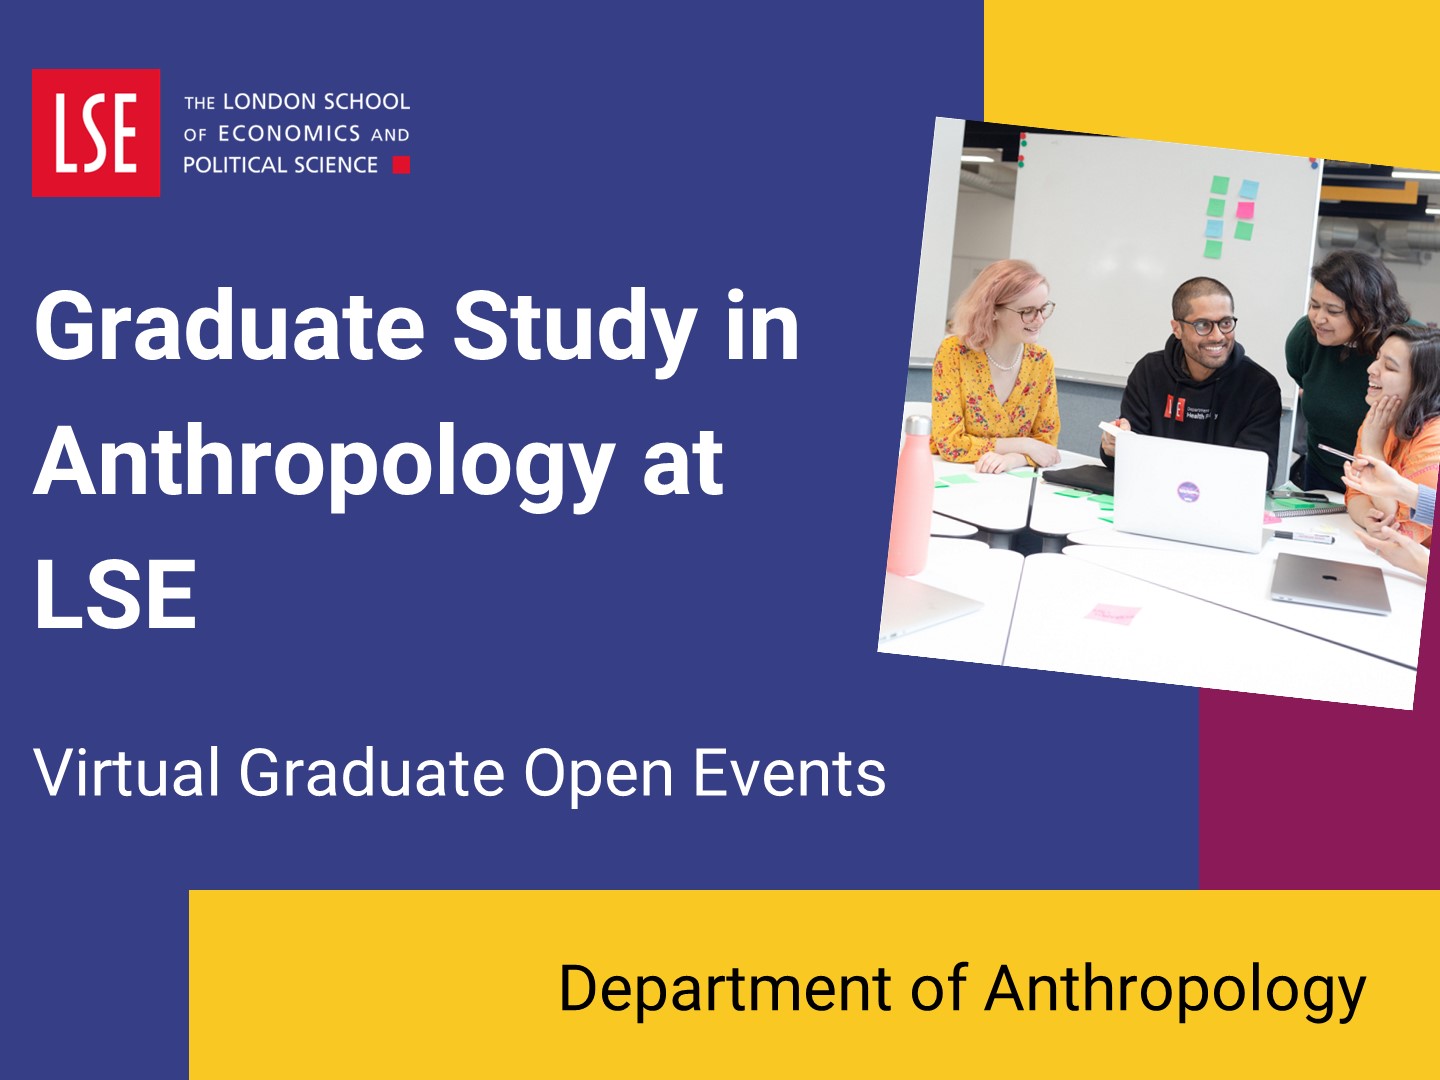 Introduction to graduate study in Anthropology at LSE